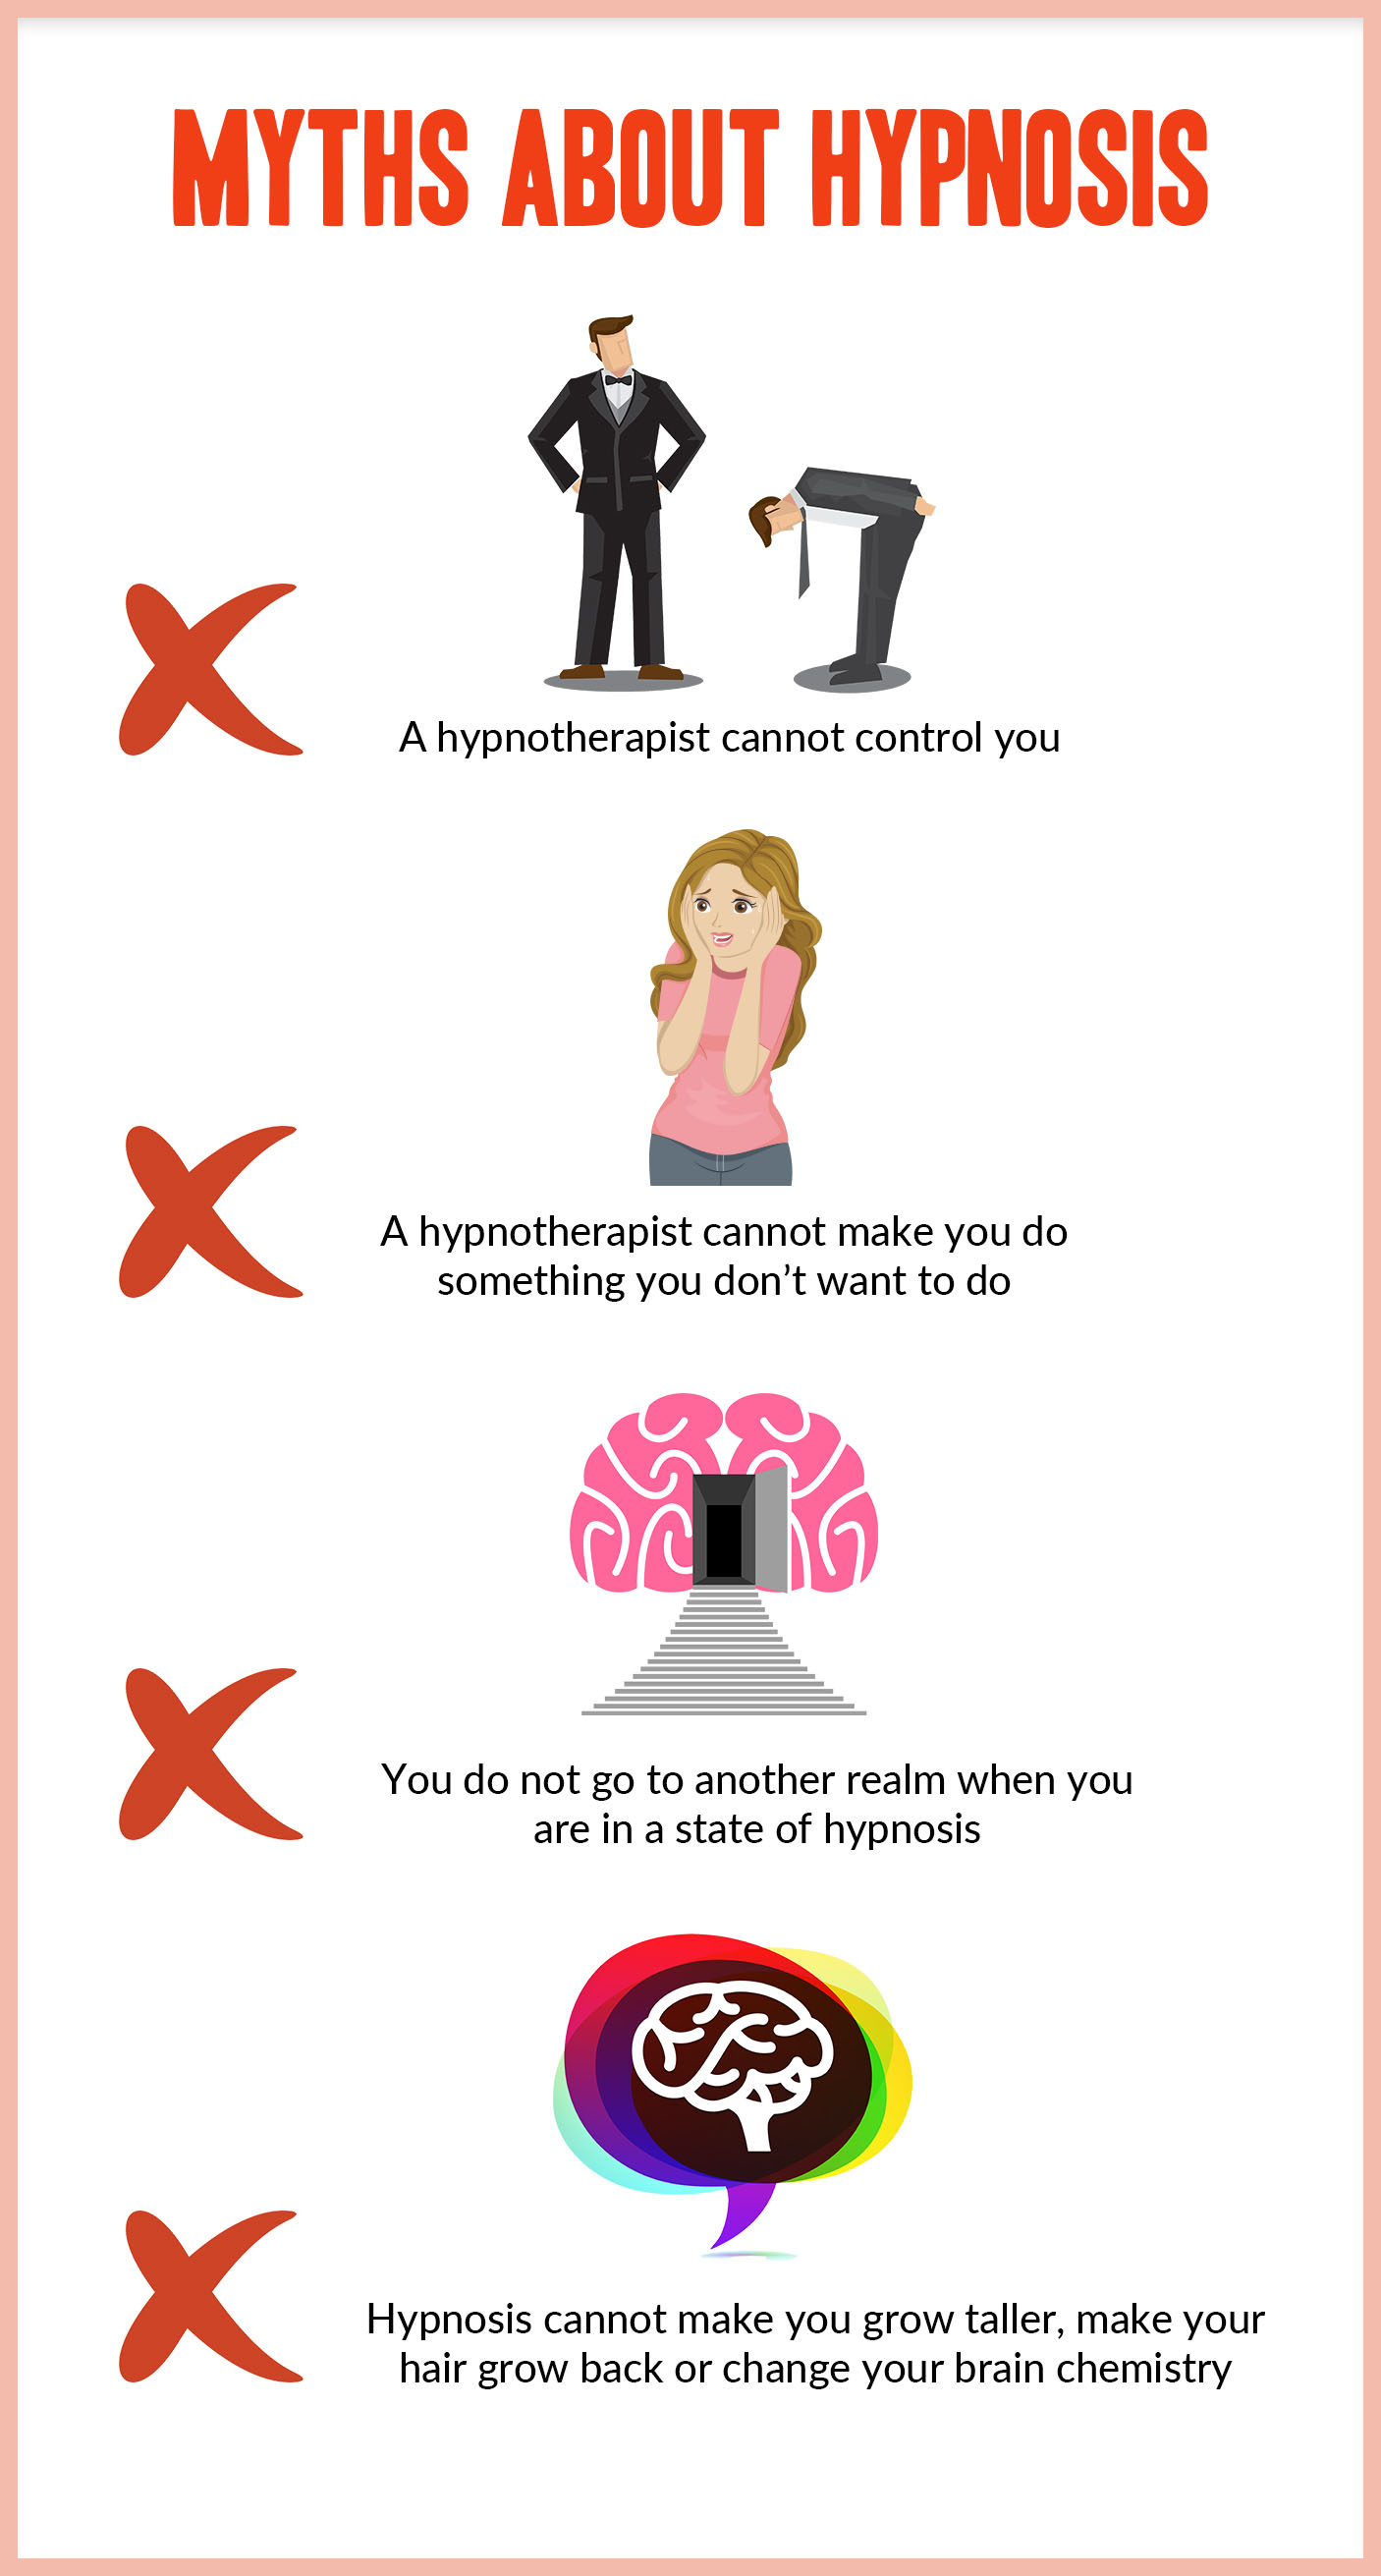 False beliefs about the process of hypnosis